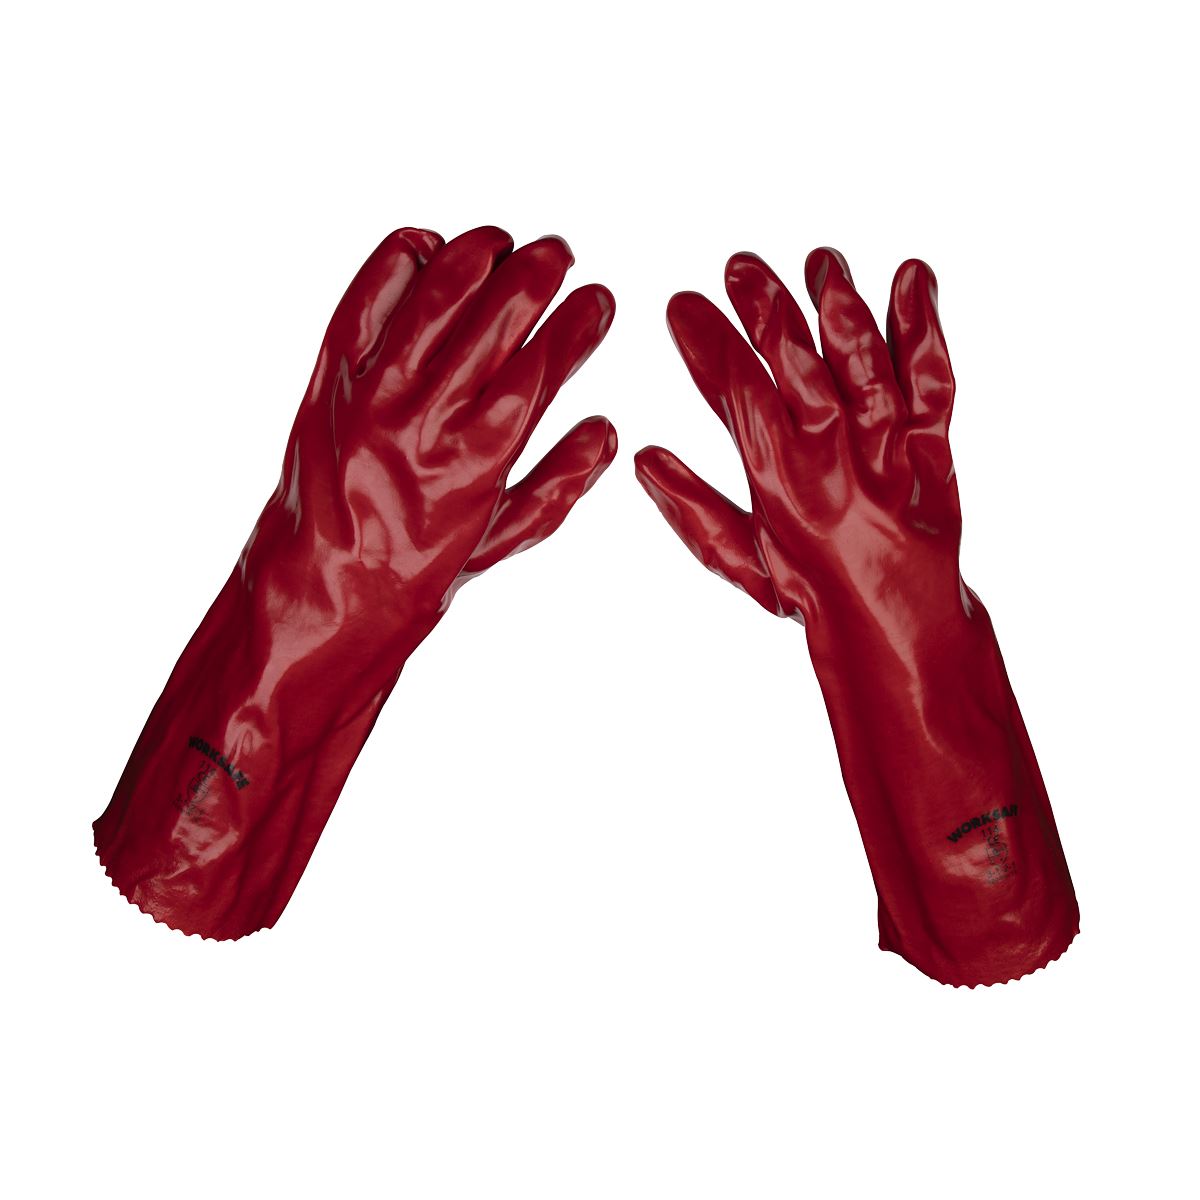 Worksafe by Sealey Red PVC Gauntlets 450mm - Pack of 120 Pairs